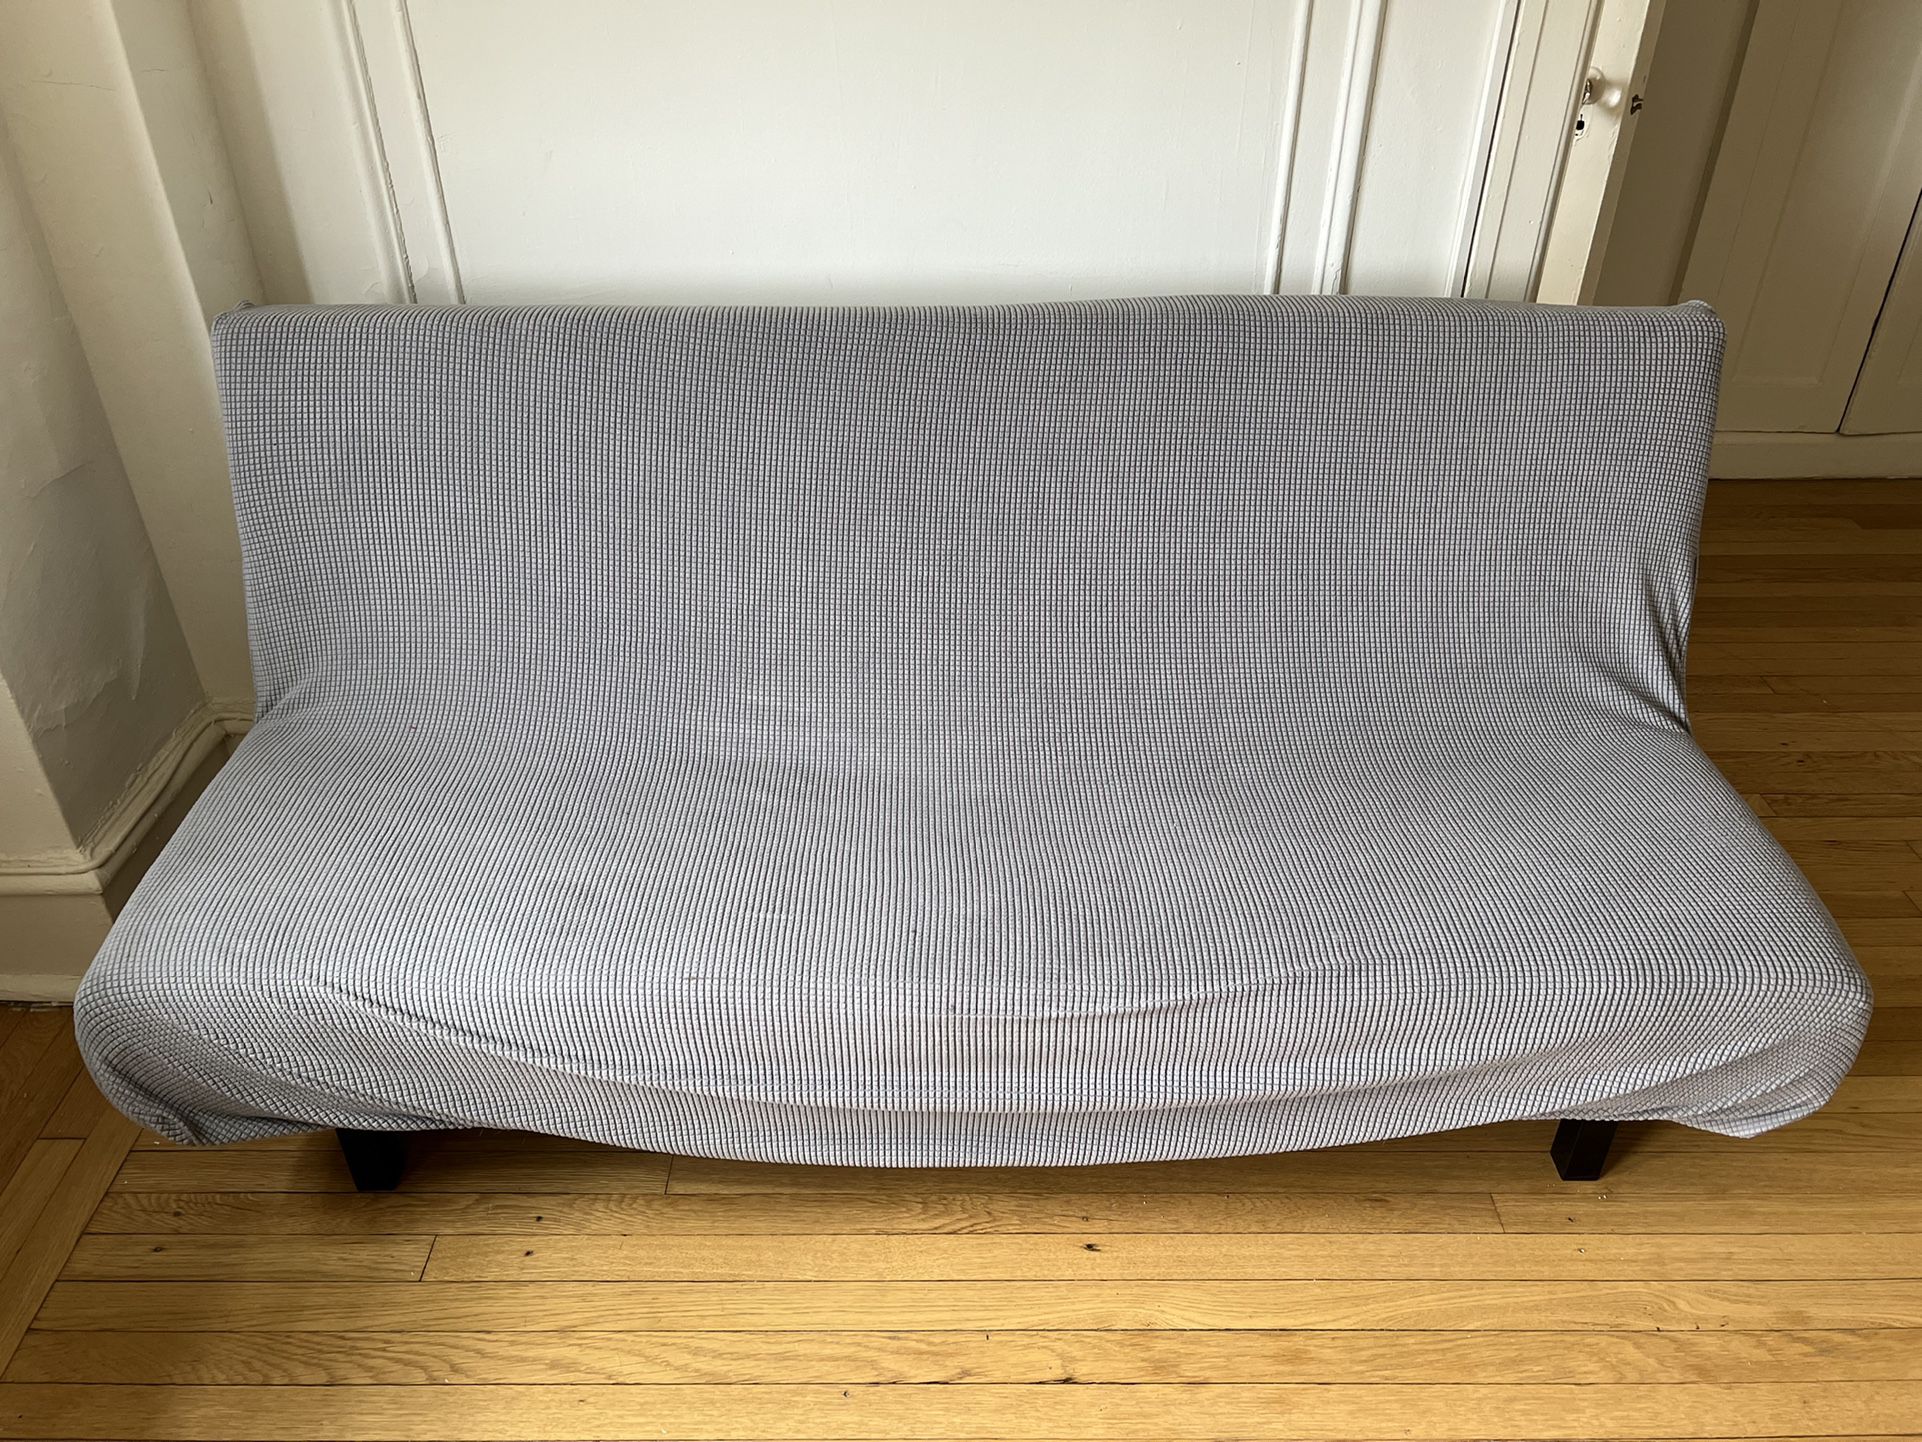 IKEA Futon With Gray Cover Included